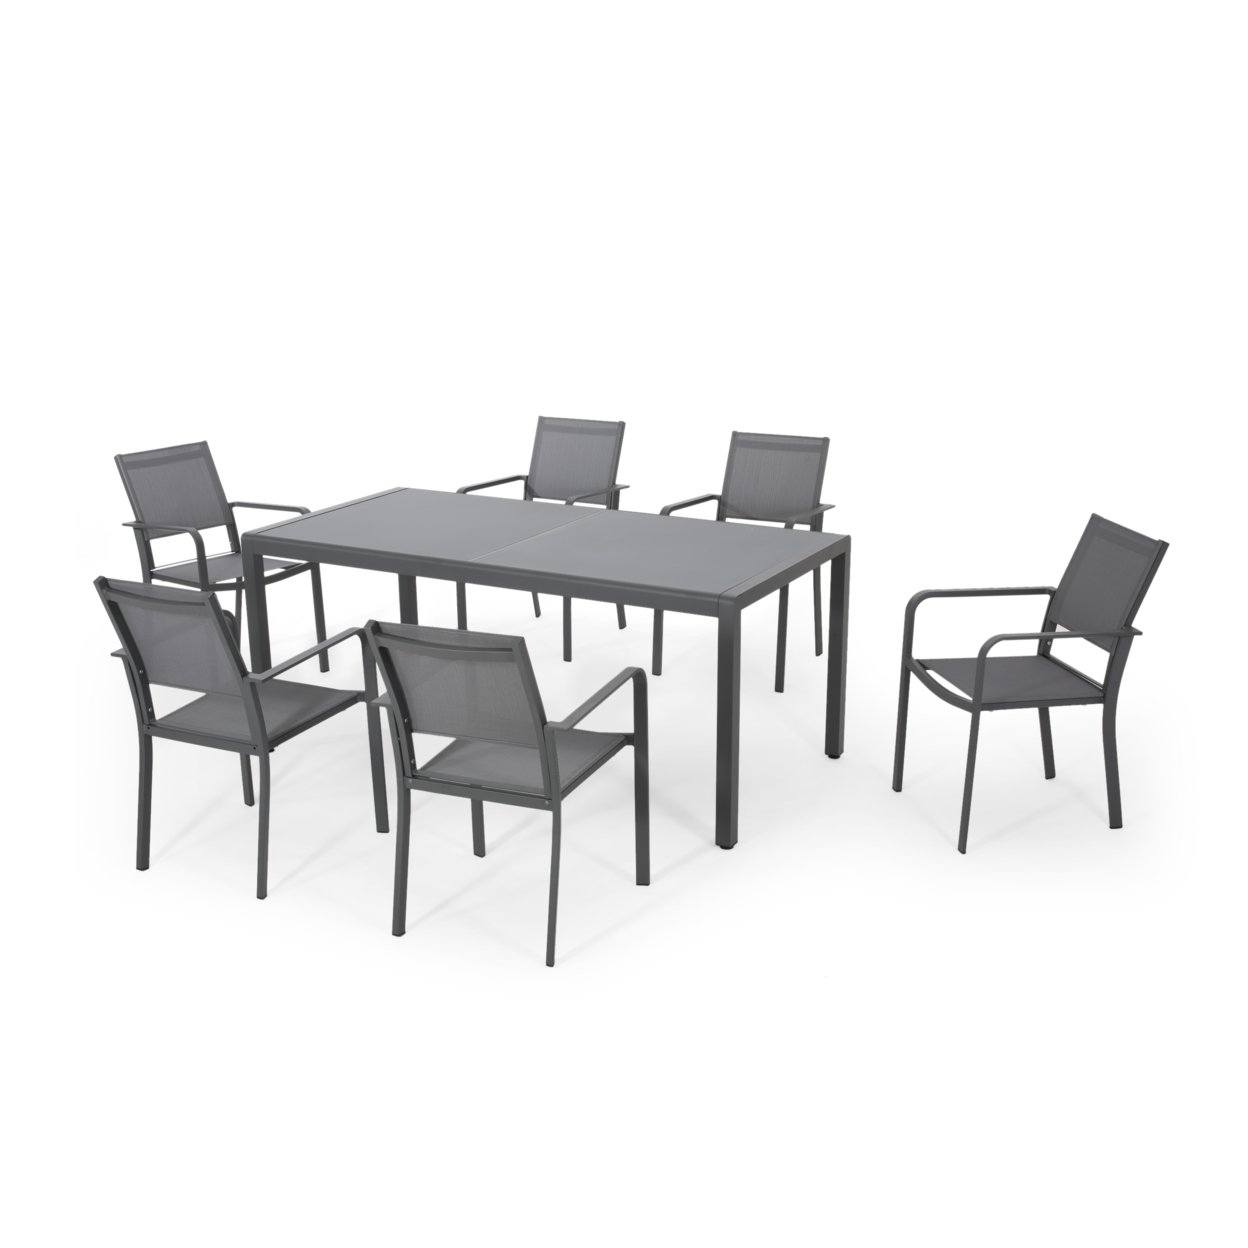 Mirabelle Outdoor 6 Seater Aluminum Dining Set with Tempered Glass Table Top - gun metal gray + dark gray